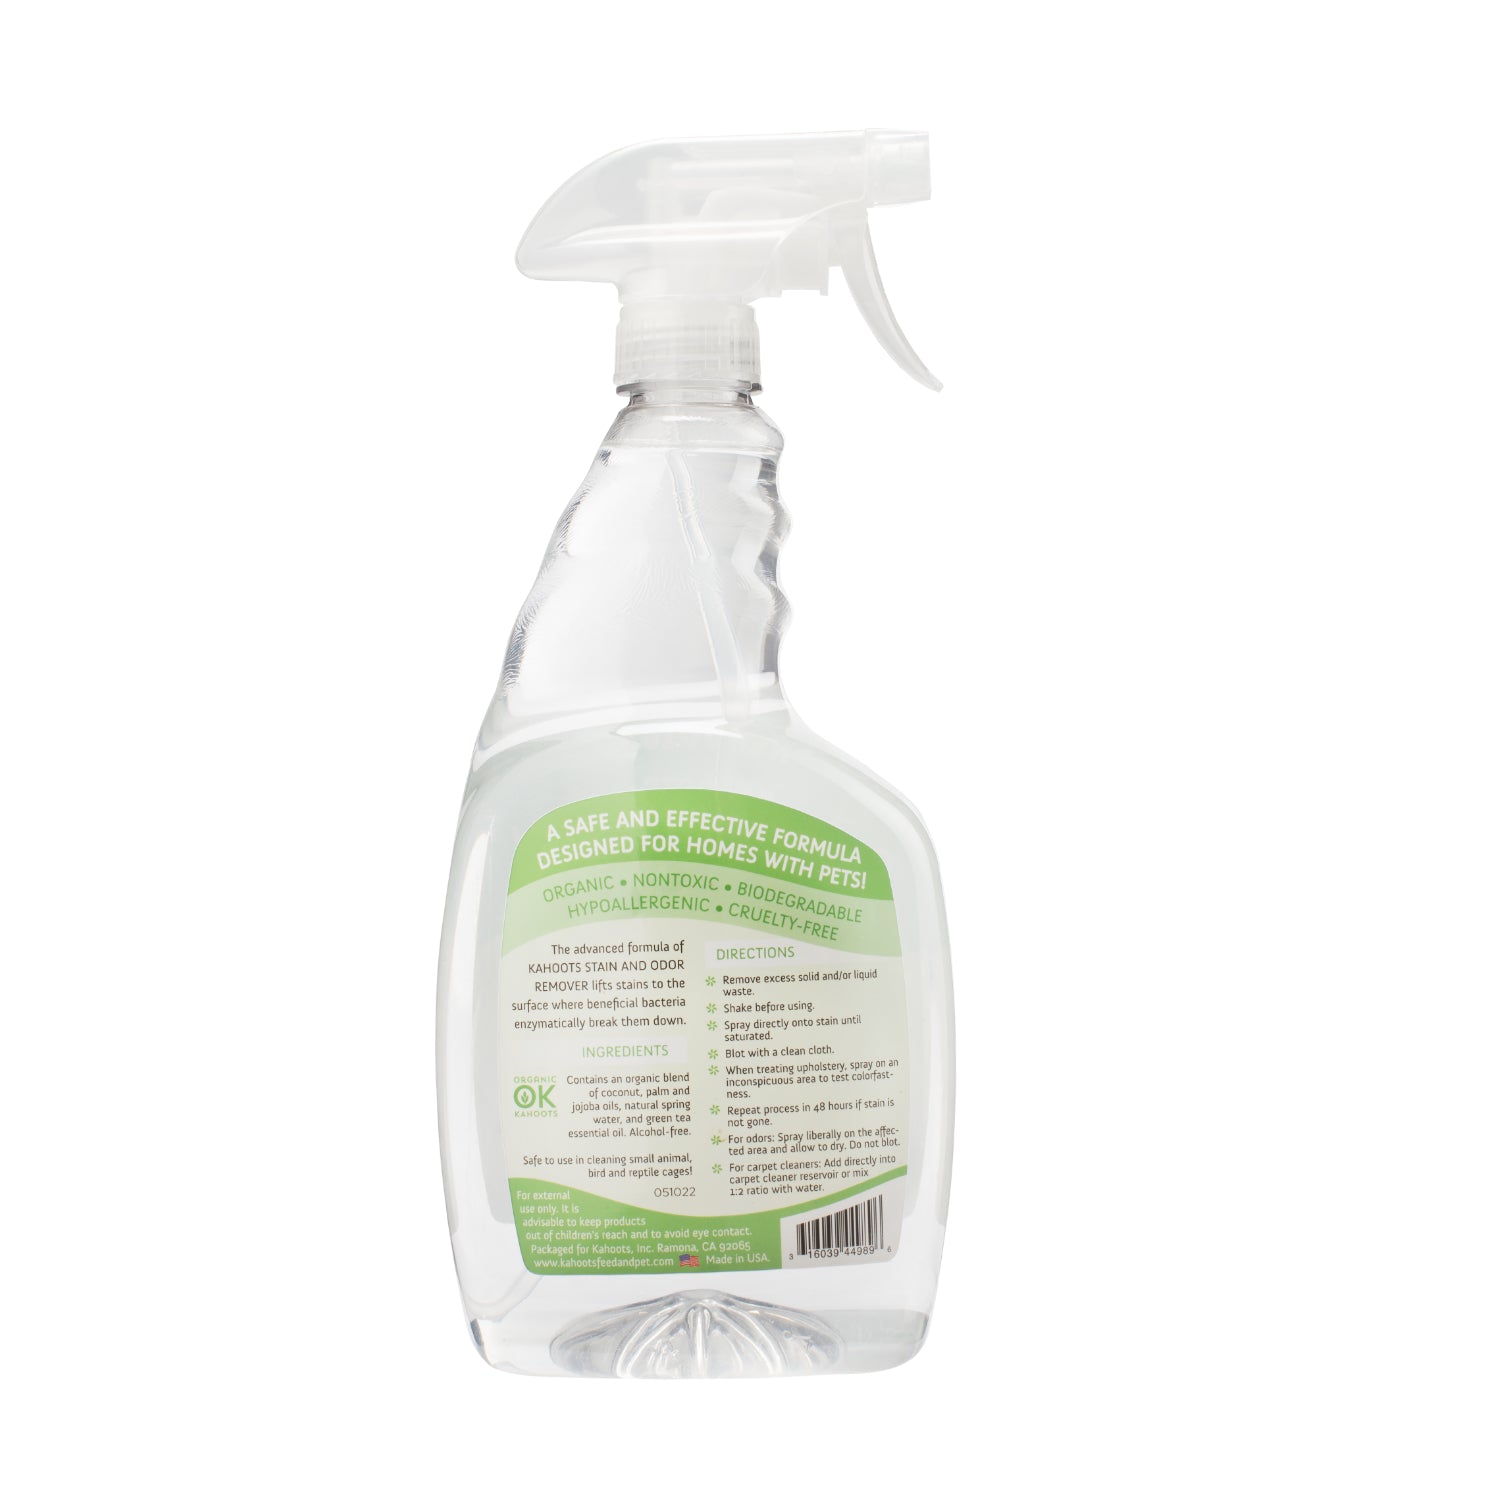 Kahoots stain and odor remover spray bottle. Green Tea scent. Green label. Back view